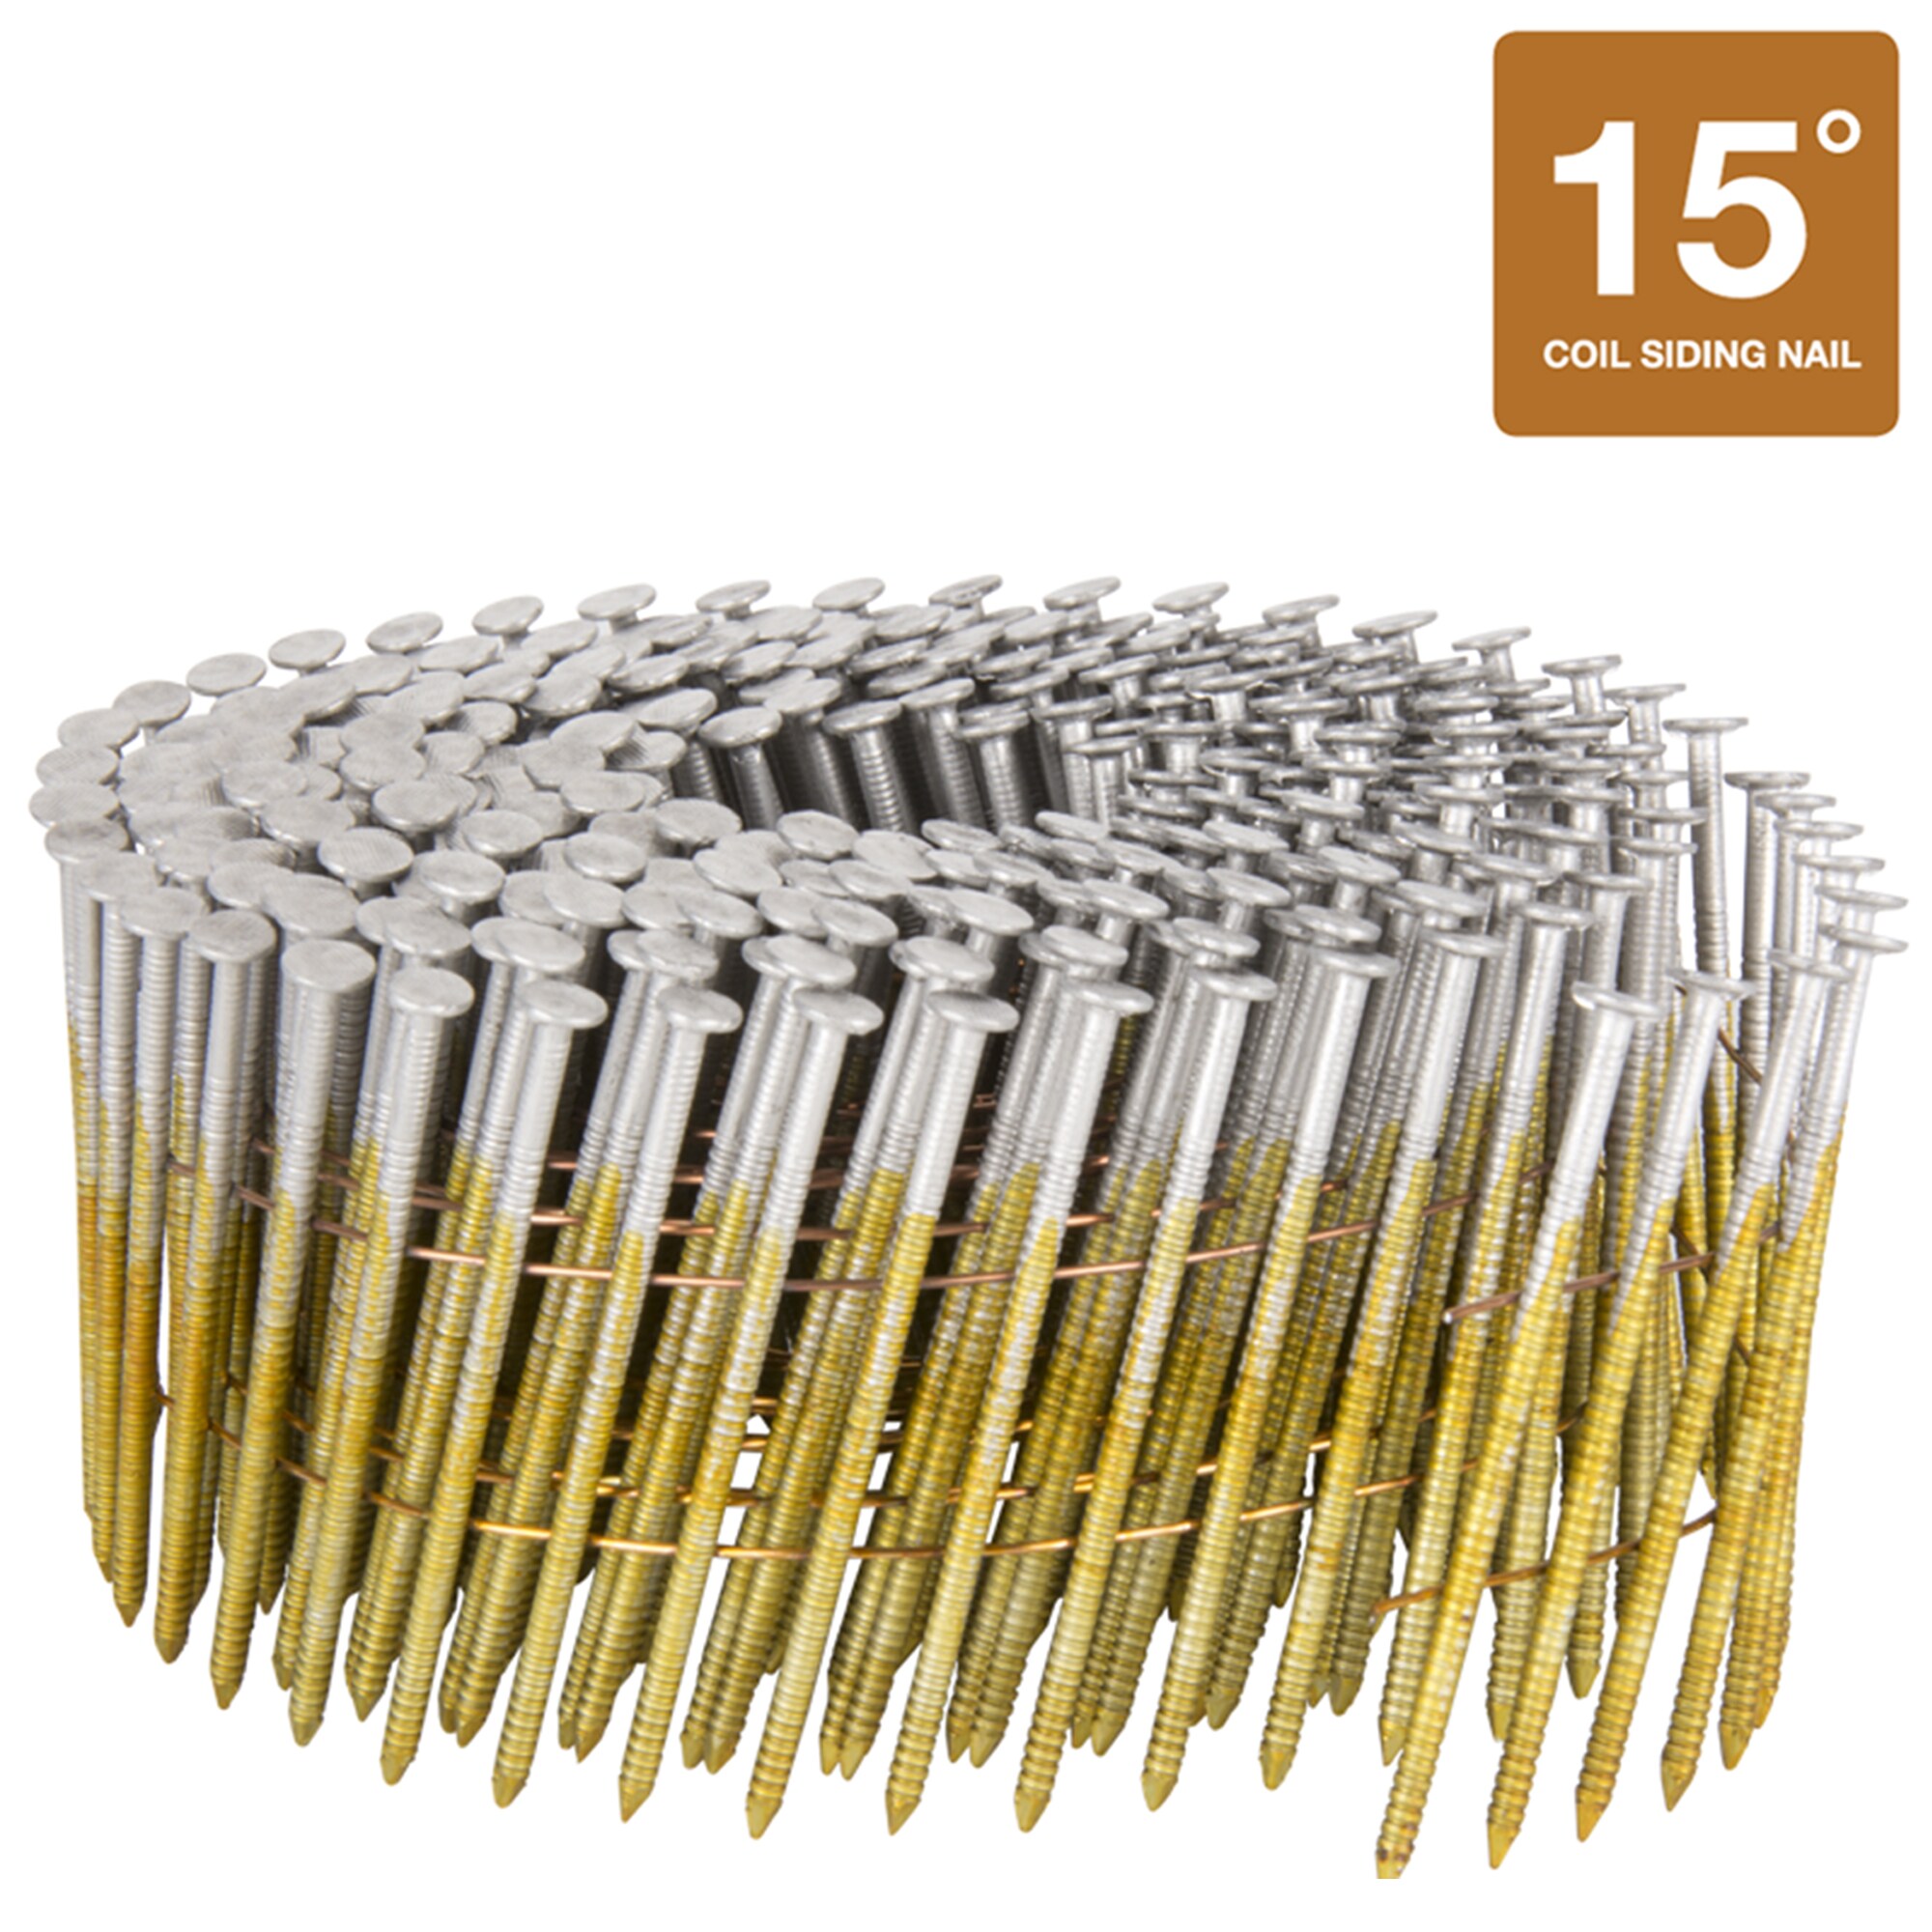 x 1-1/2" Angled Collated Finish Nails 304 S.S Grip Rite 15 Ga 1,000 